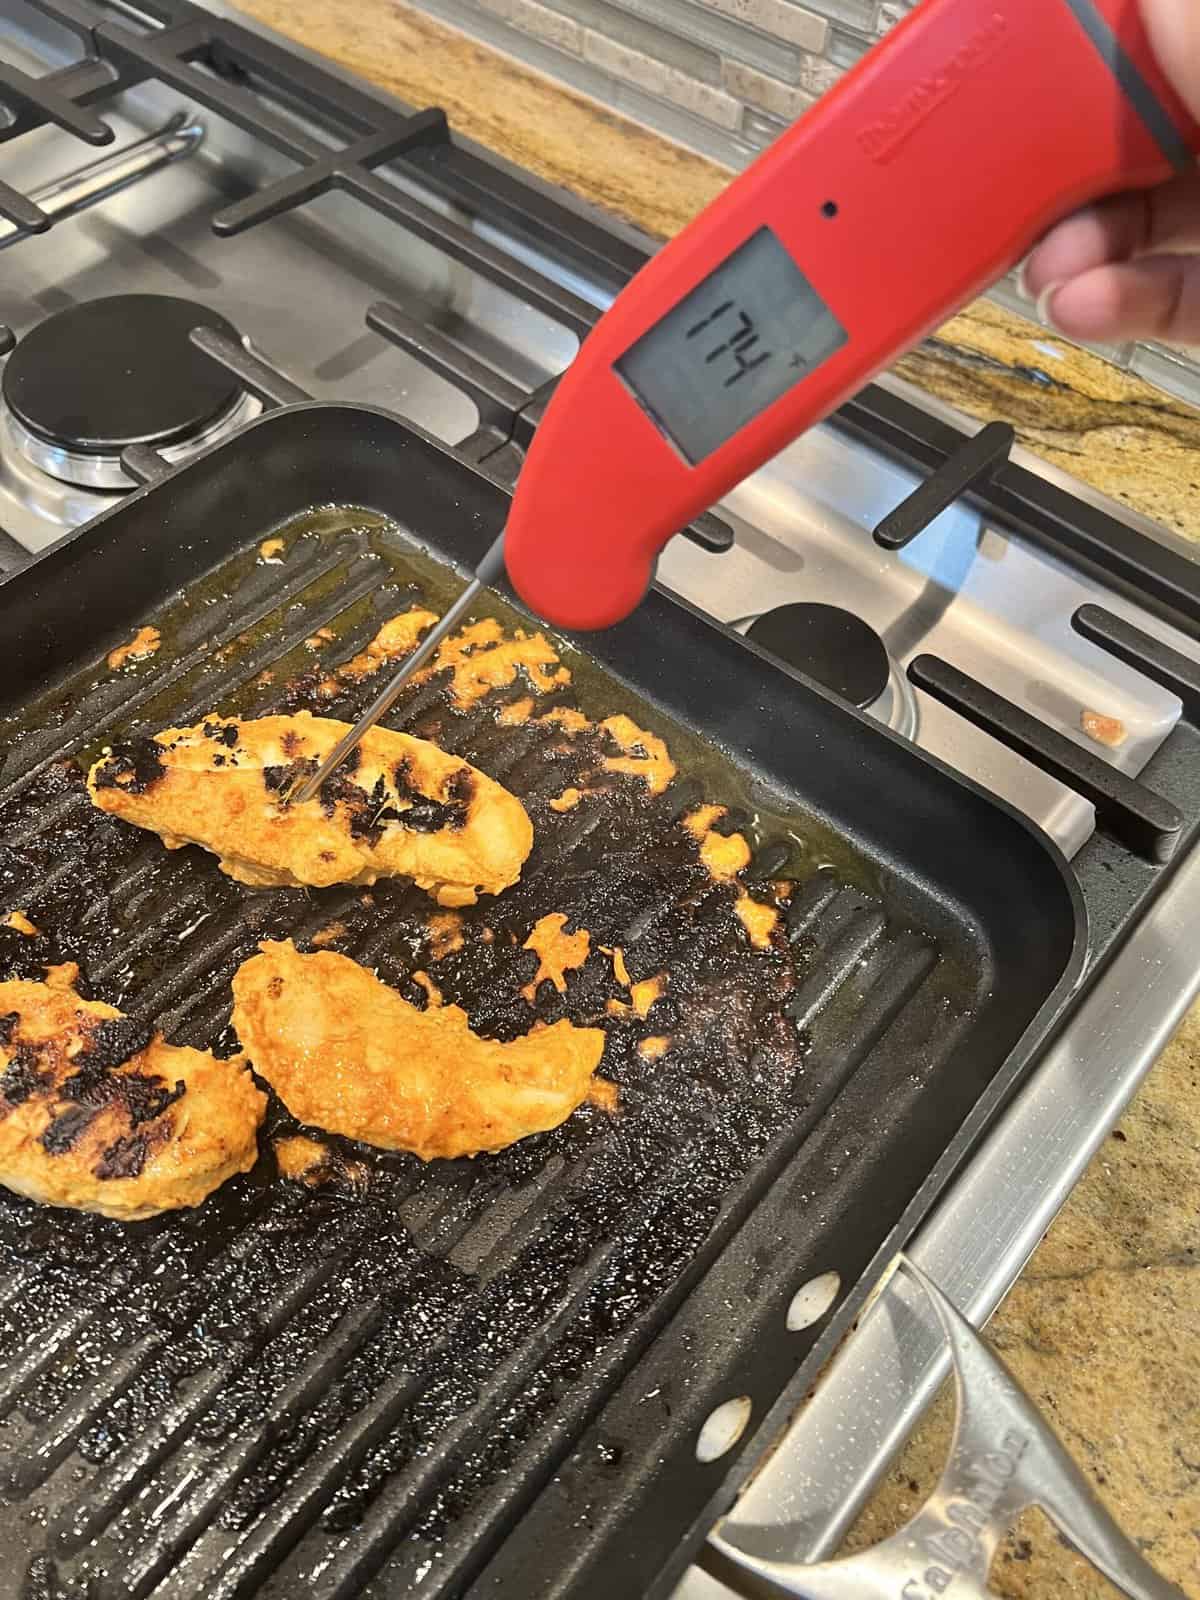 black grill pan on gas stove with cooked chicken tenderloins and red thermometer.